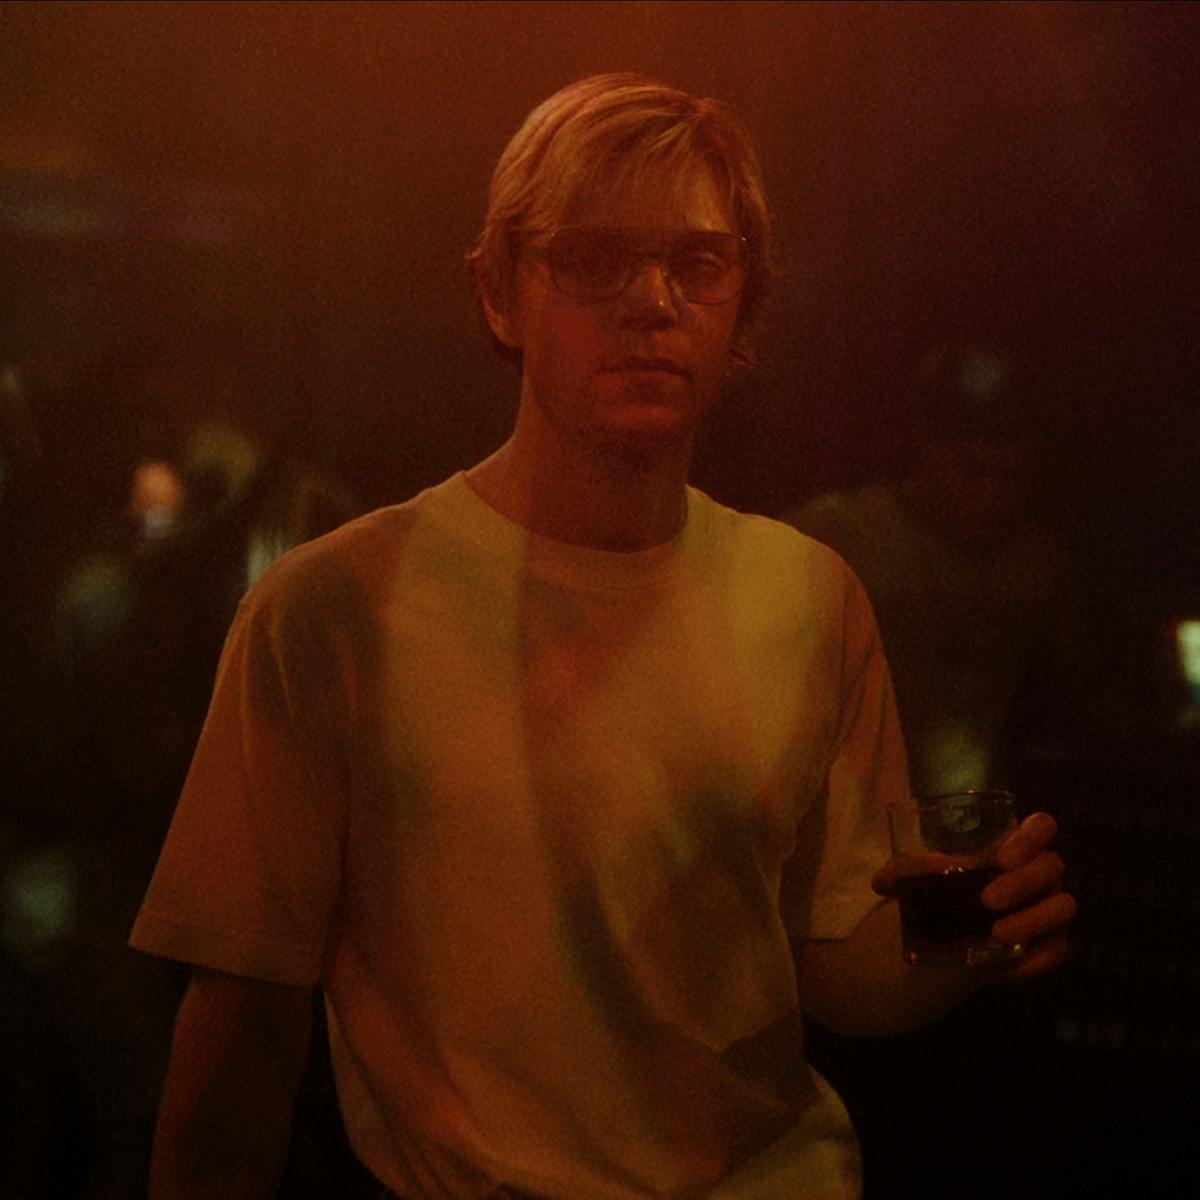 Jeffrey Dahmer (Evan Peters) wears a white t-shirt, glasses, and holds a glass of dark liquid in a smoky dark room.